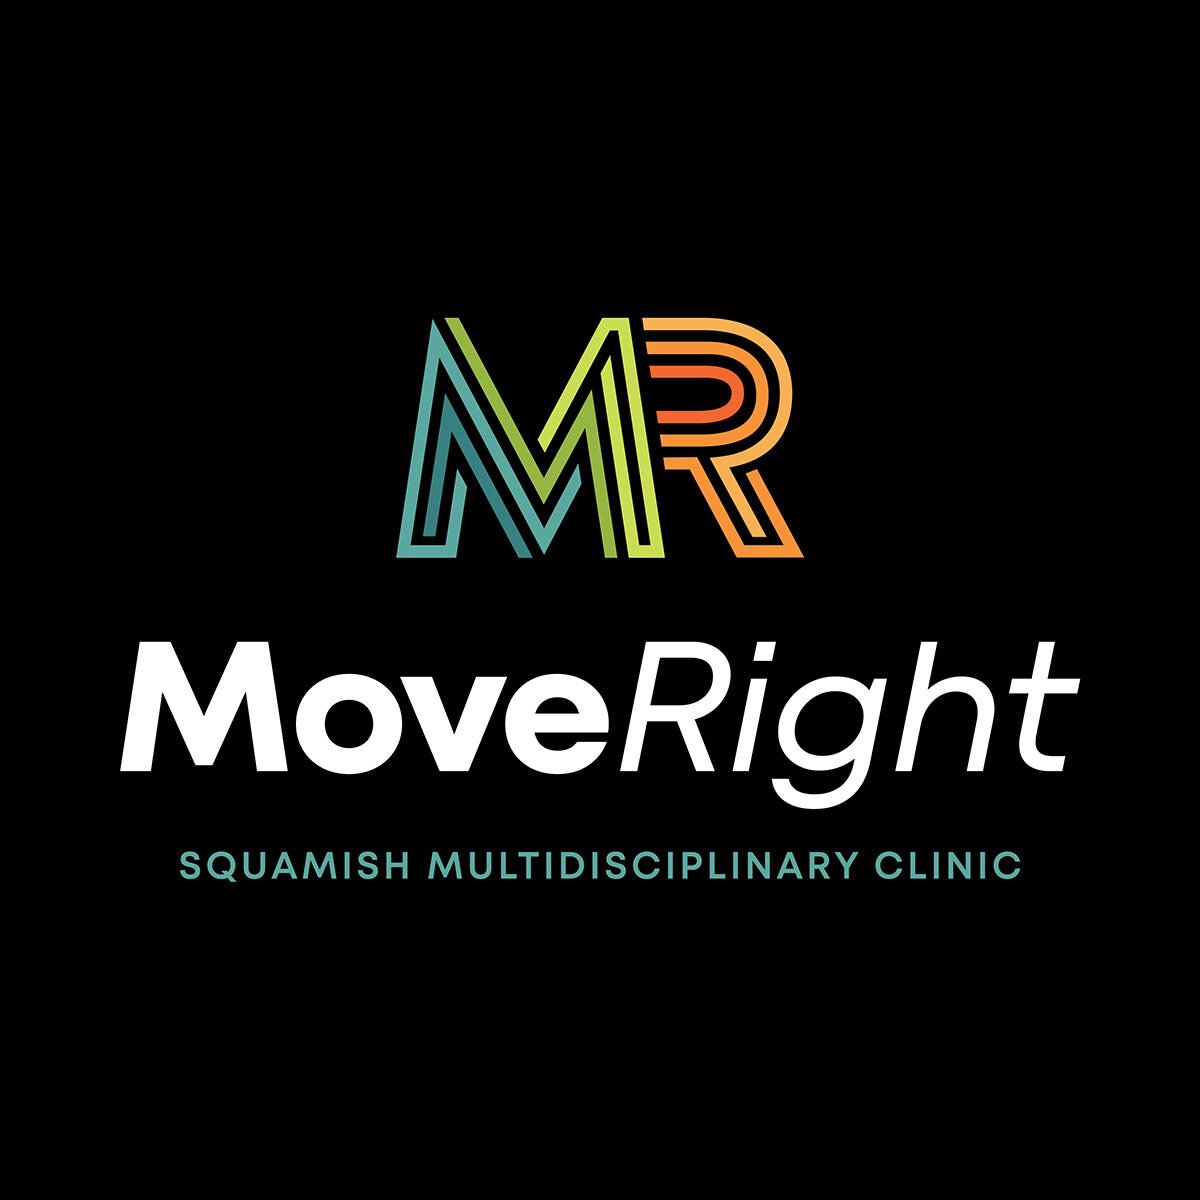 lindsay-mcghee-designs-MoveRight-Squamish-logo-stacked